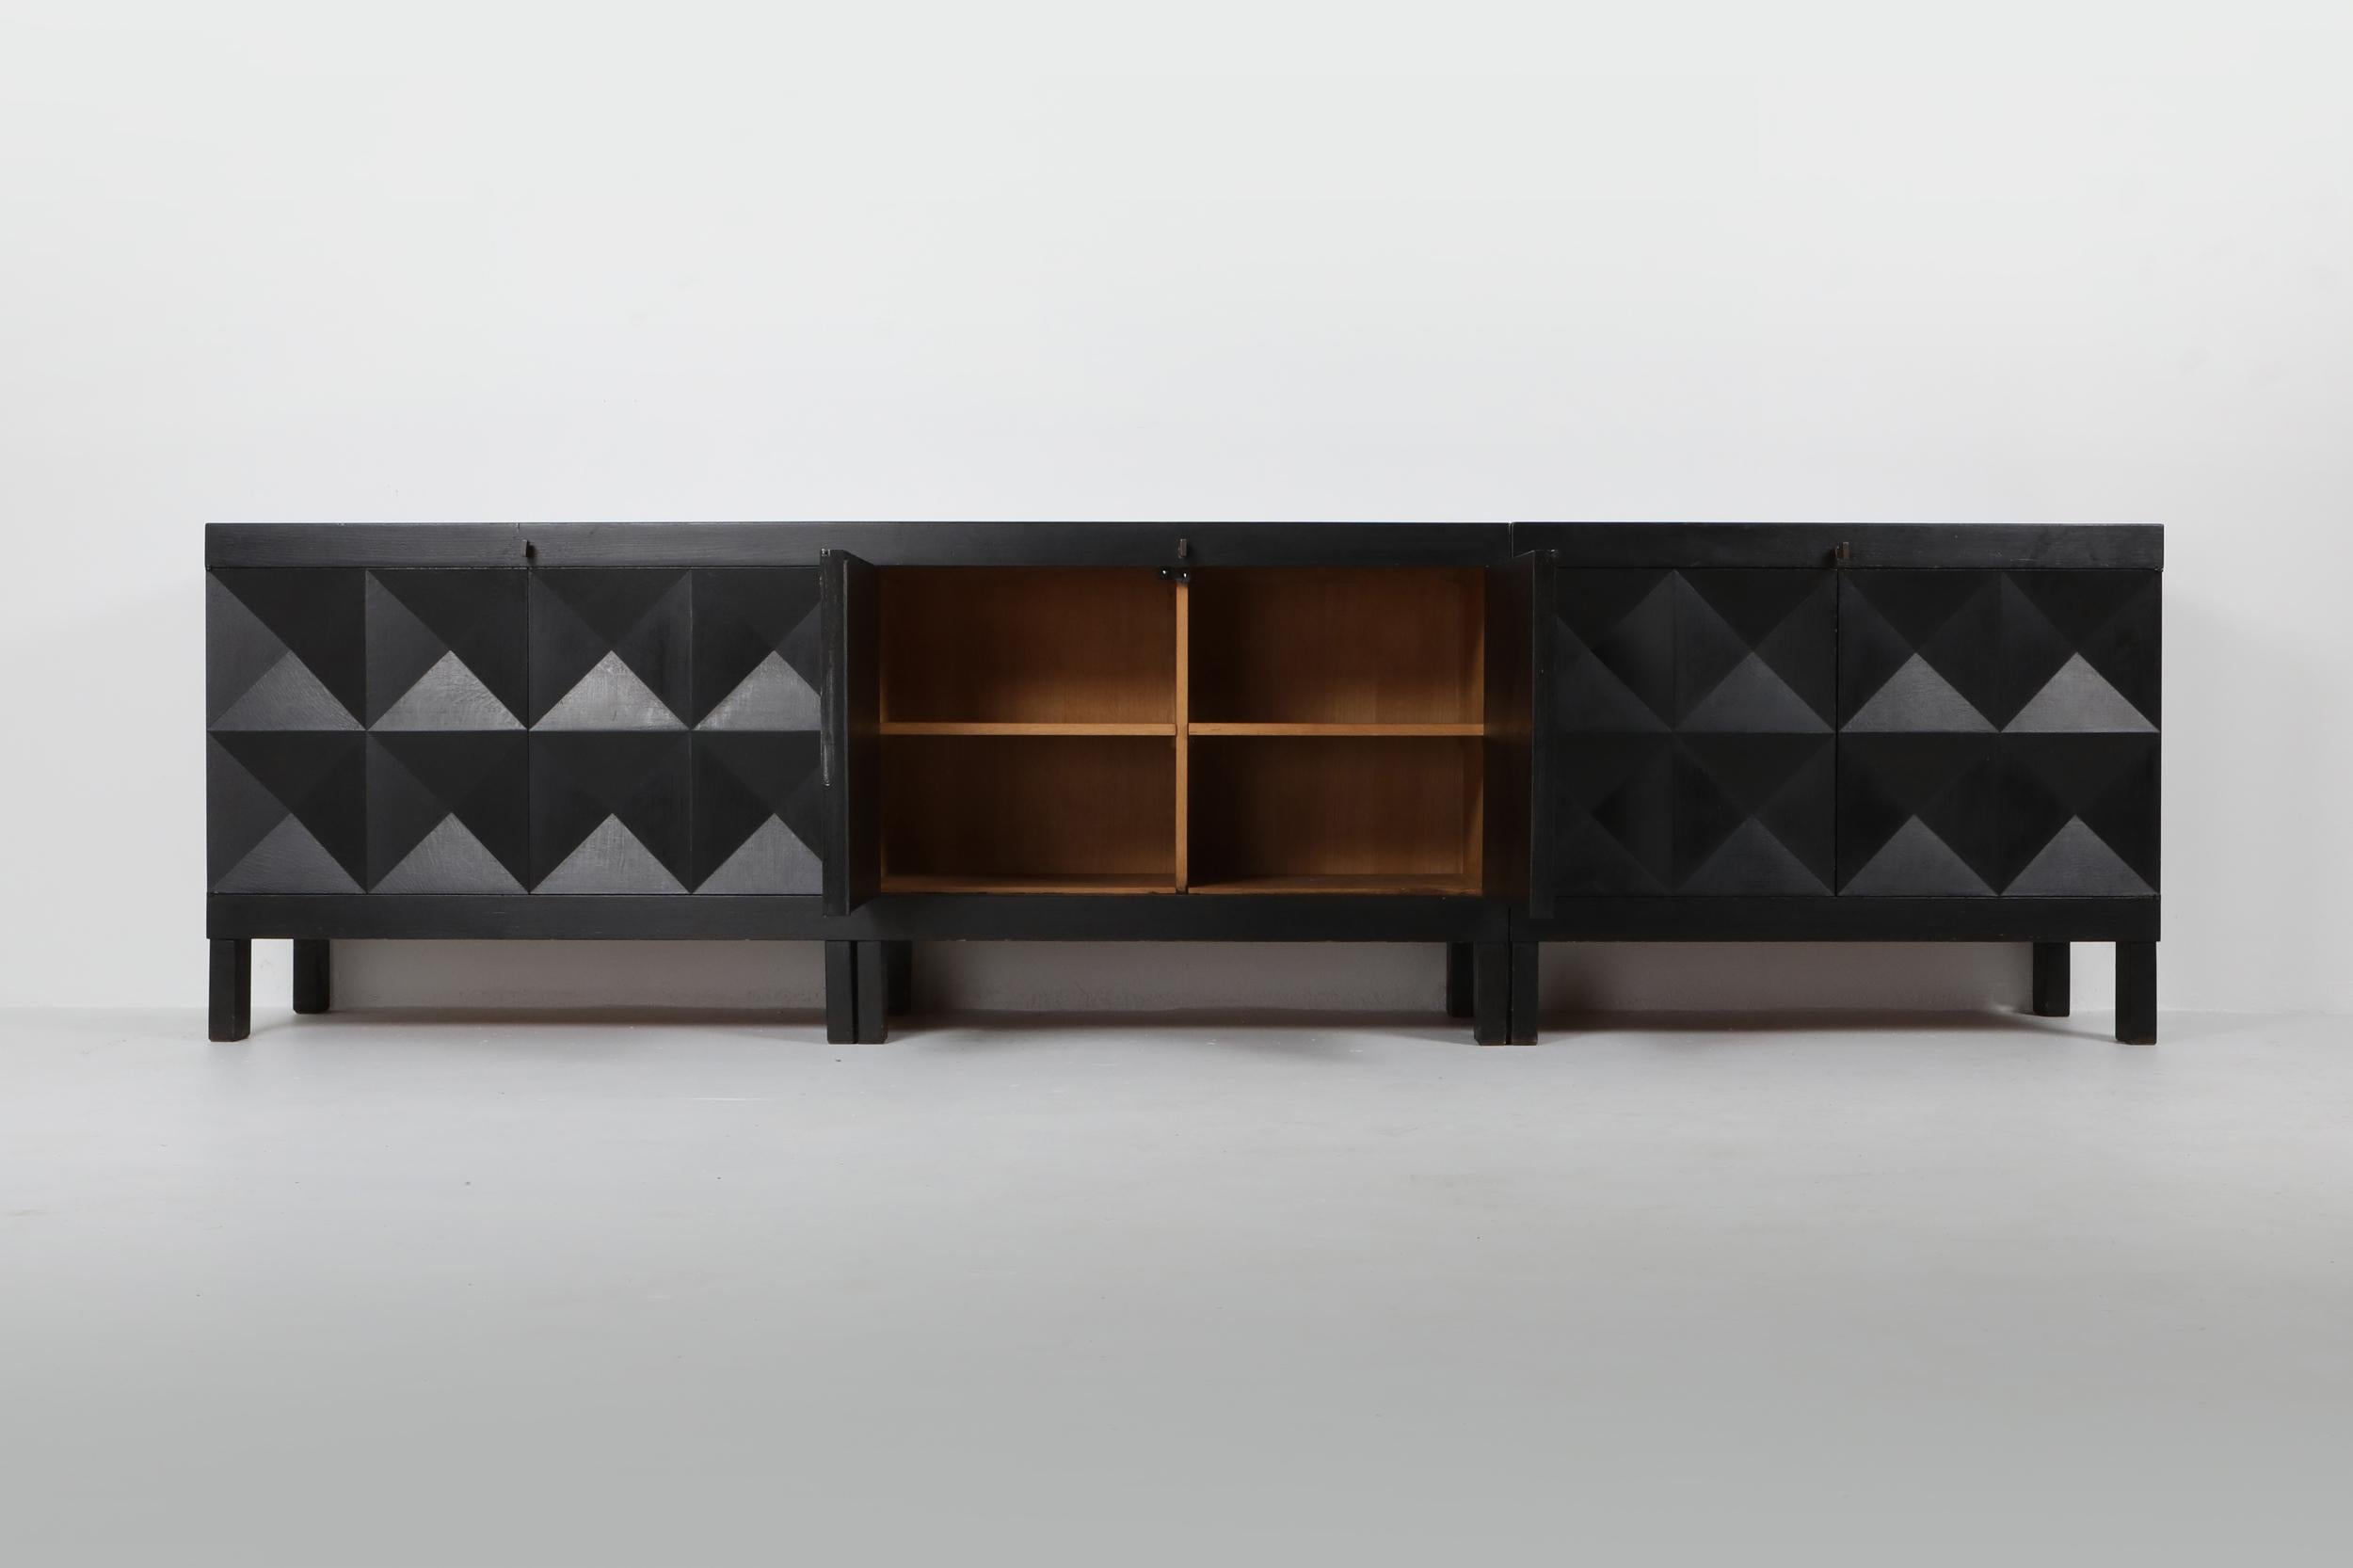 Geometrical credenza, De Coene Belgium, ebonized oak, 1970s
This is an extra large sideboard which actually consists of a regular size sideboard and cabinet placed next to each other giving a total width of 3 meters.
Both piece are also available